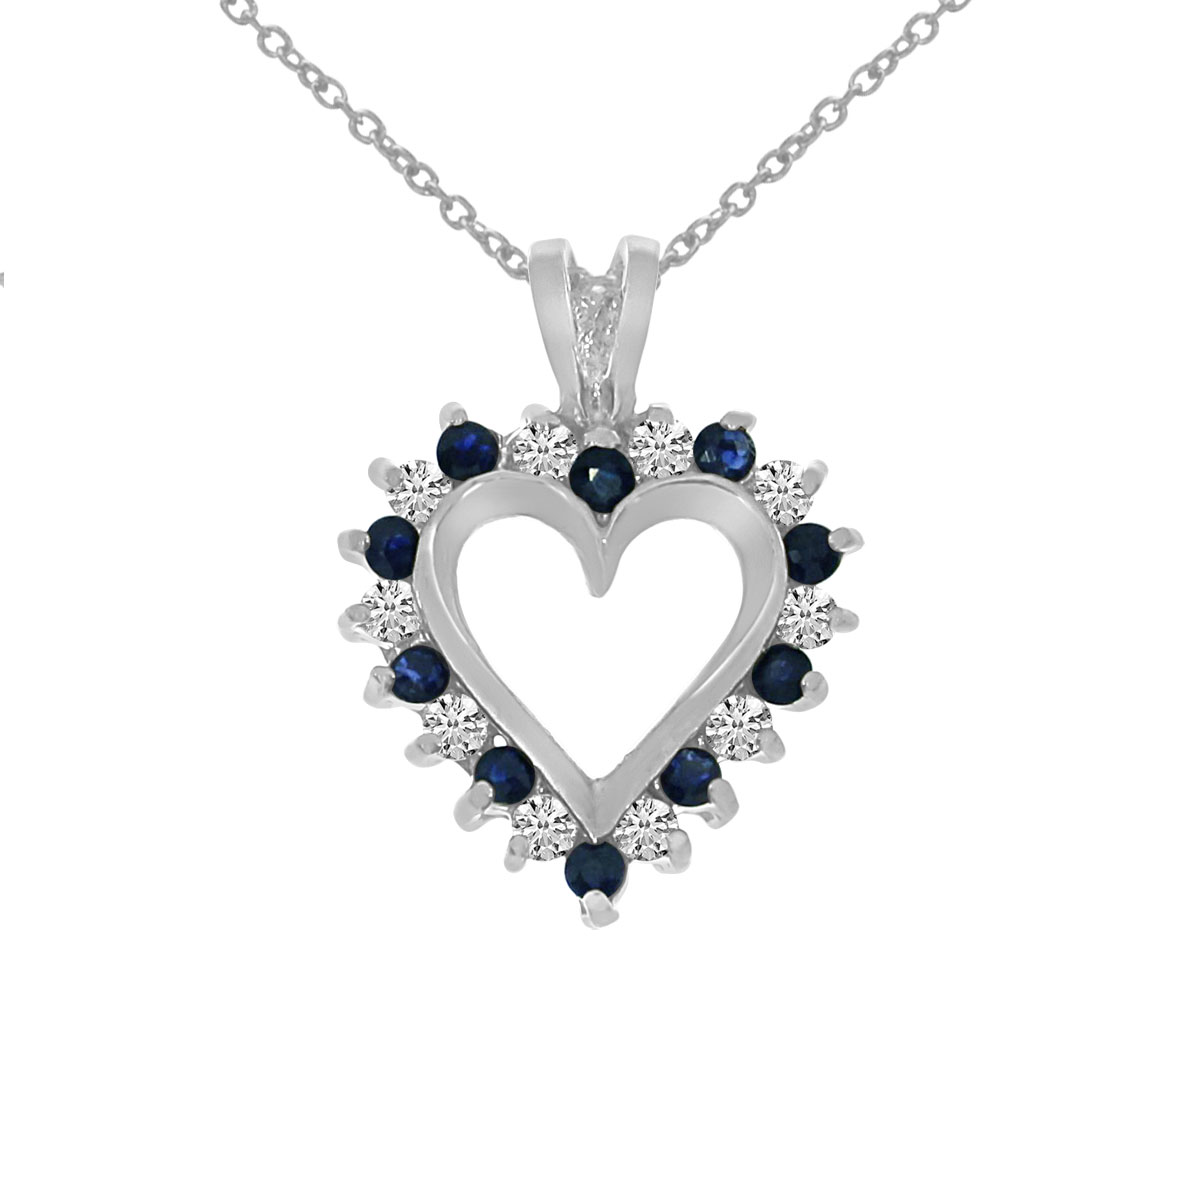 A dazzling 14k white gold heart pendant surrounded by .25 carats of shimmering diamonds and .25 carats of beautiful sapphires.